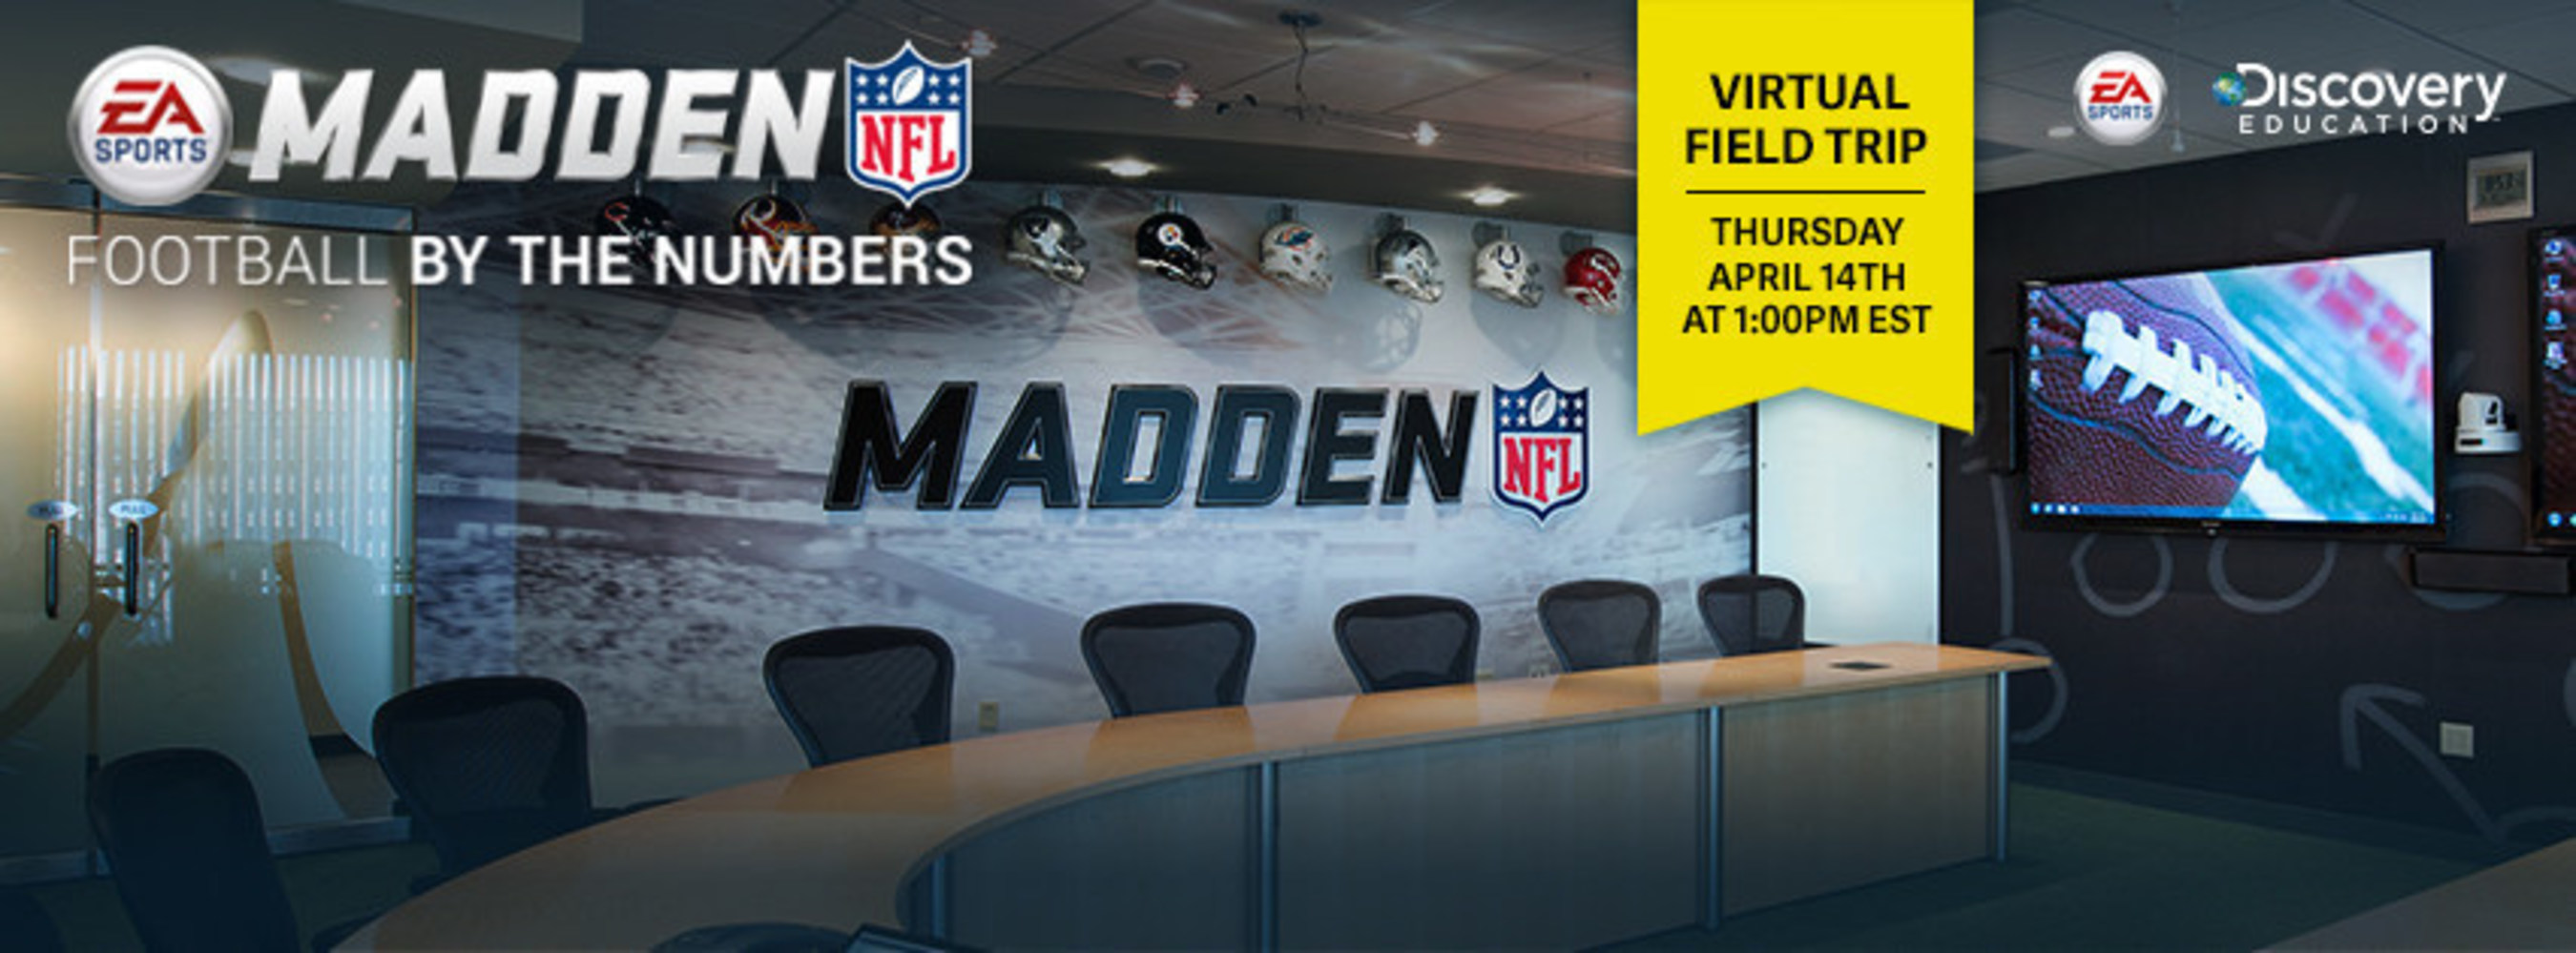 LIVE Virtual Field Trip at EA Tiburon Development Studio in Orlando Connects Middle School Students with Engineers, Animators, Designers, and More for Inside Look at STEAM Careers Powering Madden NFL